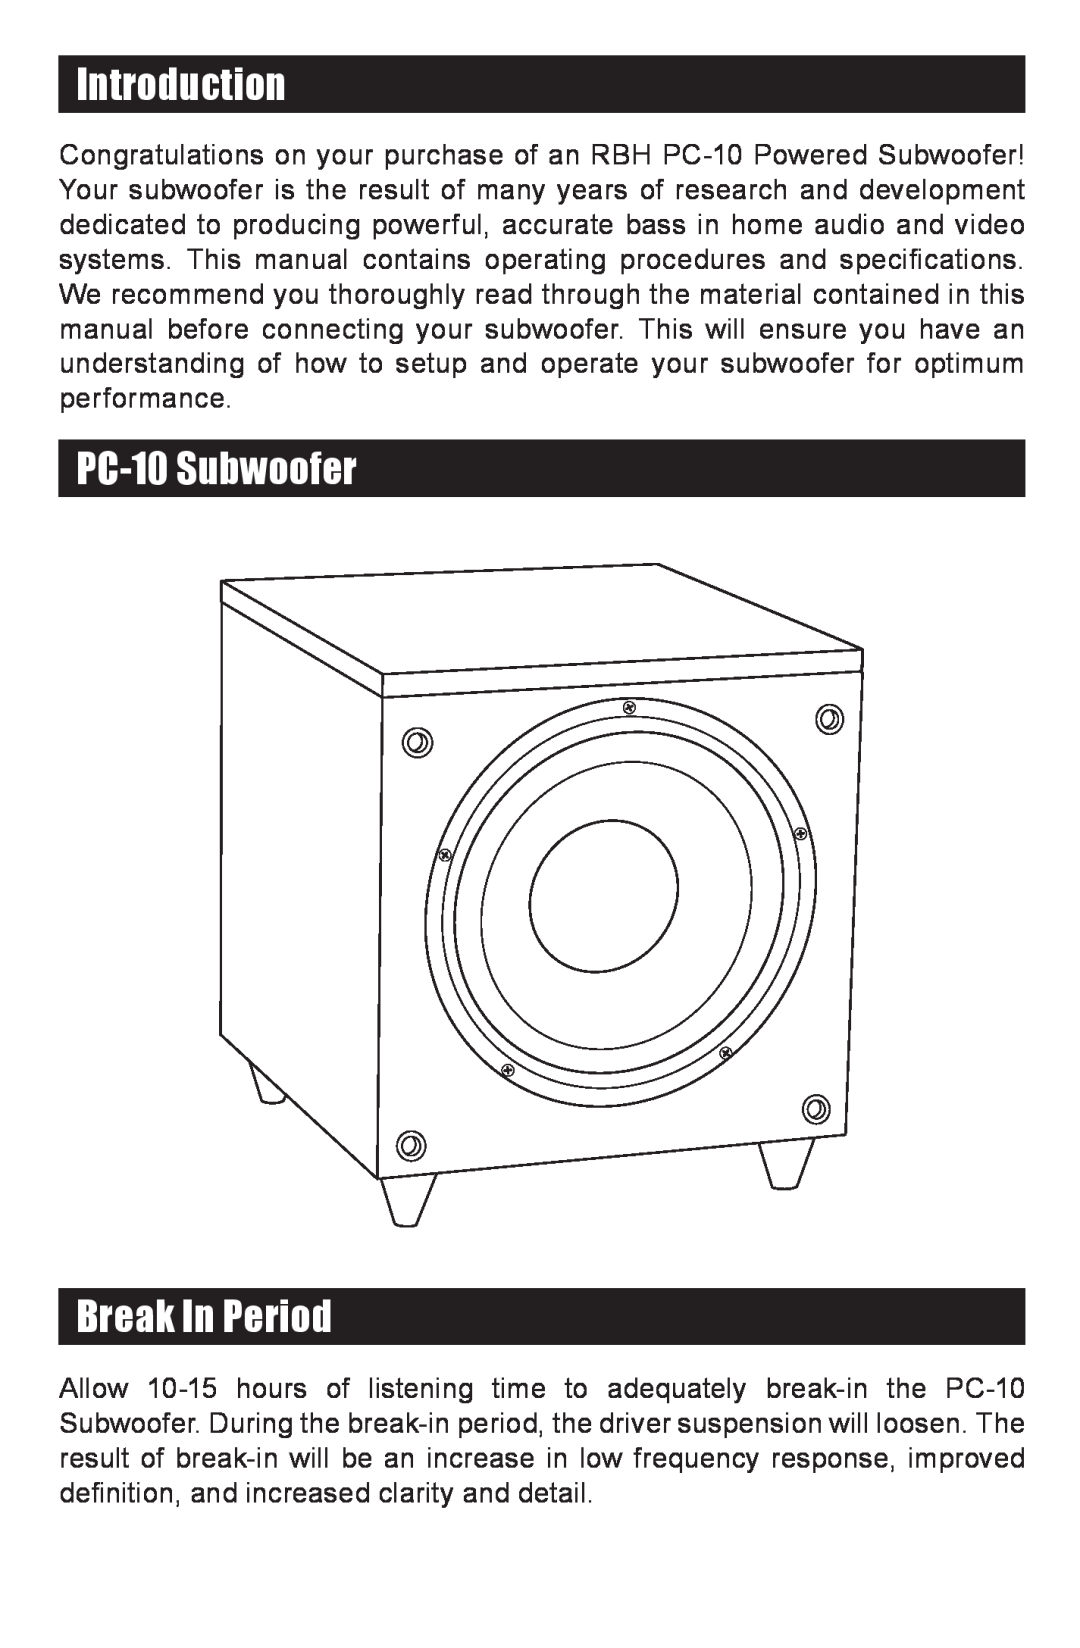 RBH Sound PC-10 SUBWOOFER owner manual Introduction, PC-10Subwoofer Break In Period 